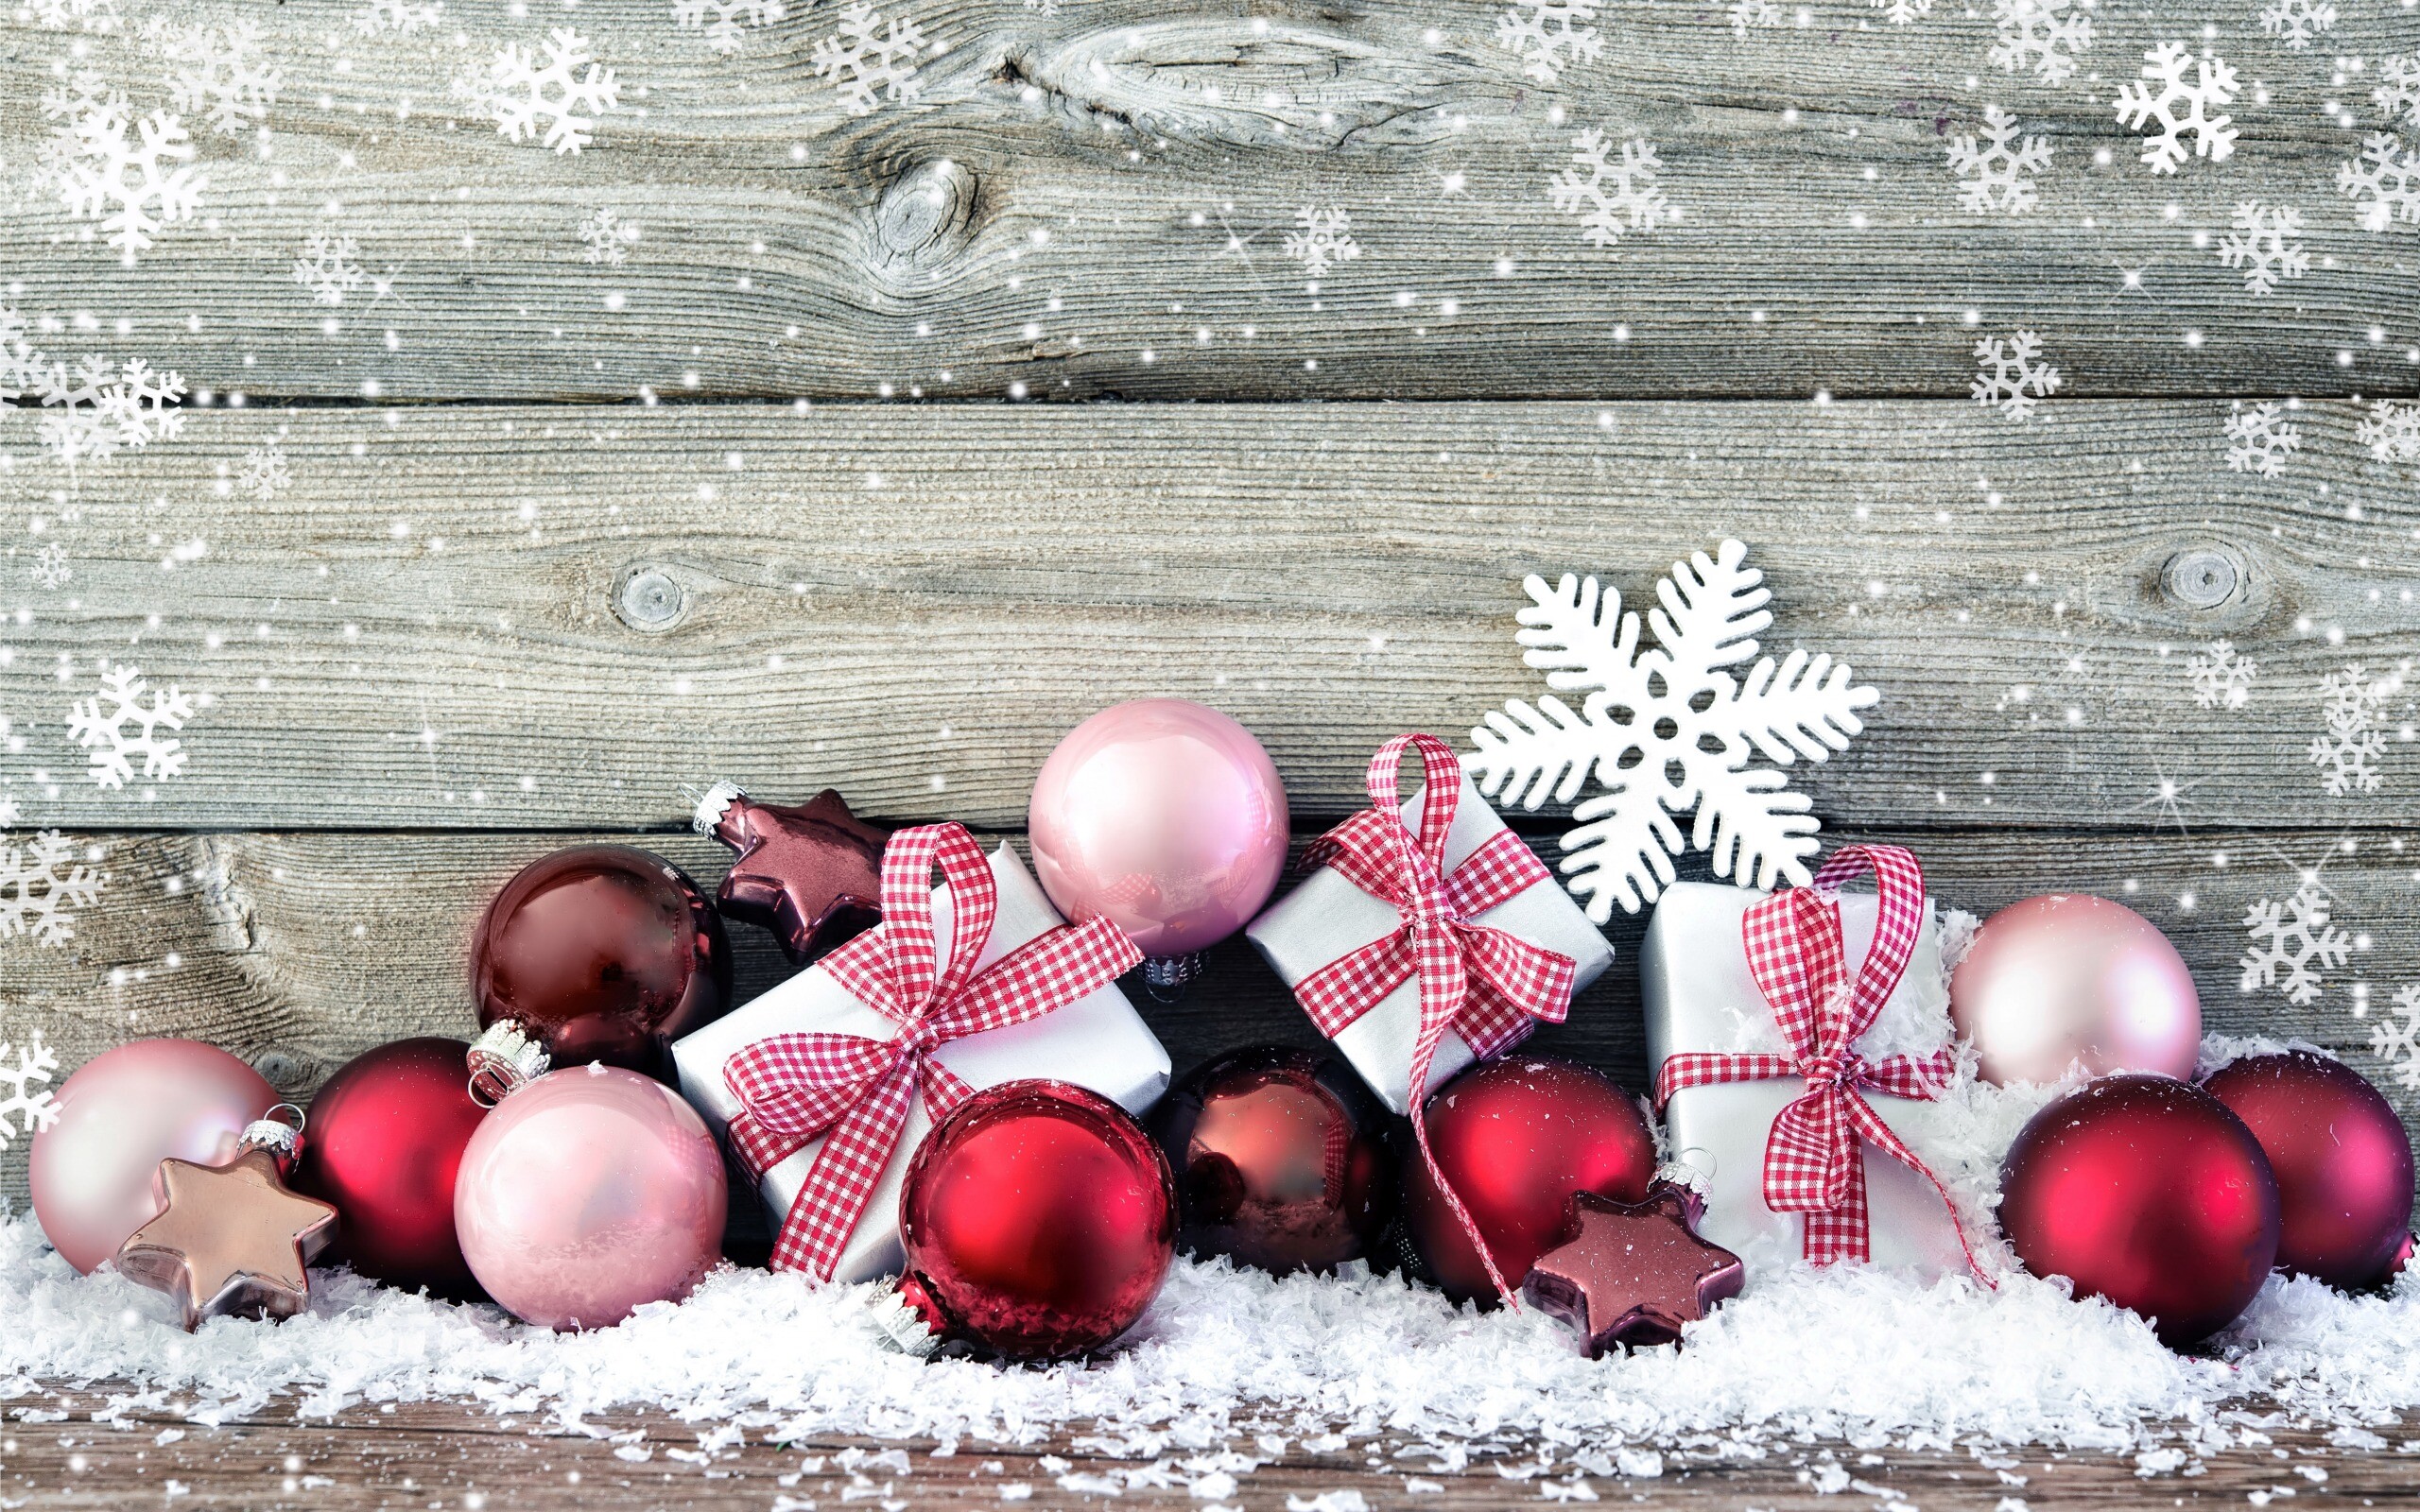 Christmas Ornament: Red Xmas decorations, Wooden wall, Snow. 2560x1600 HD Wallpaper.